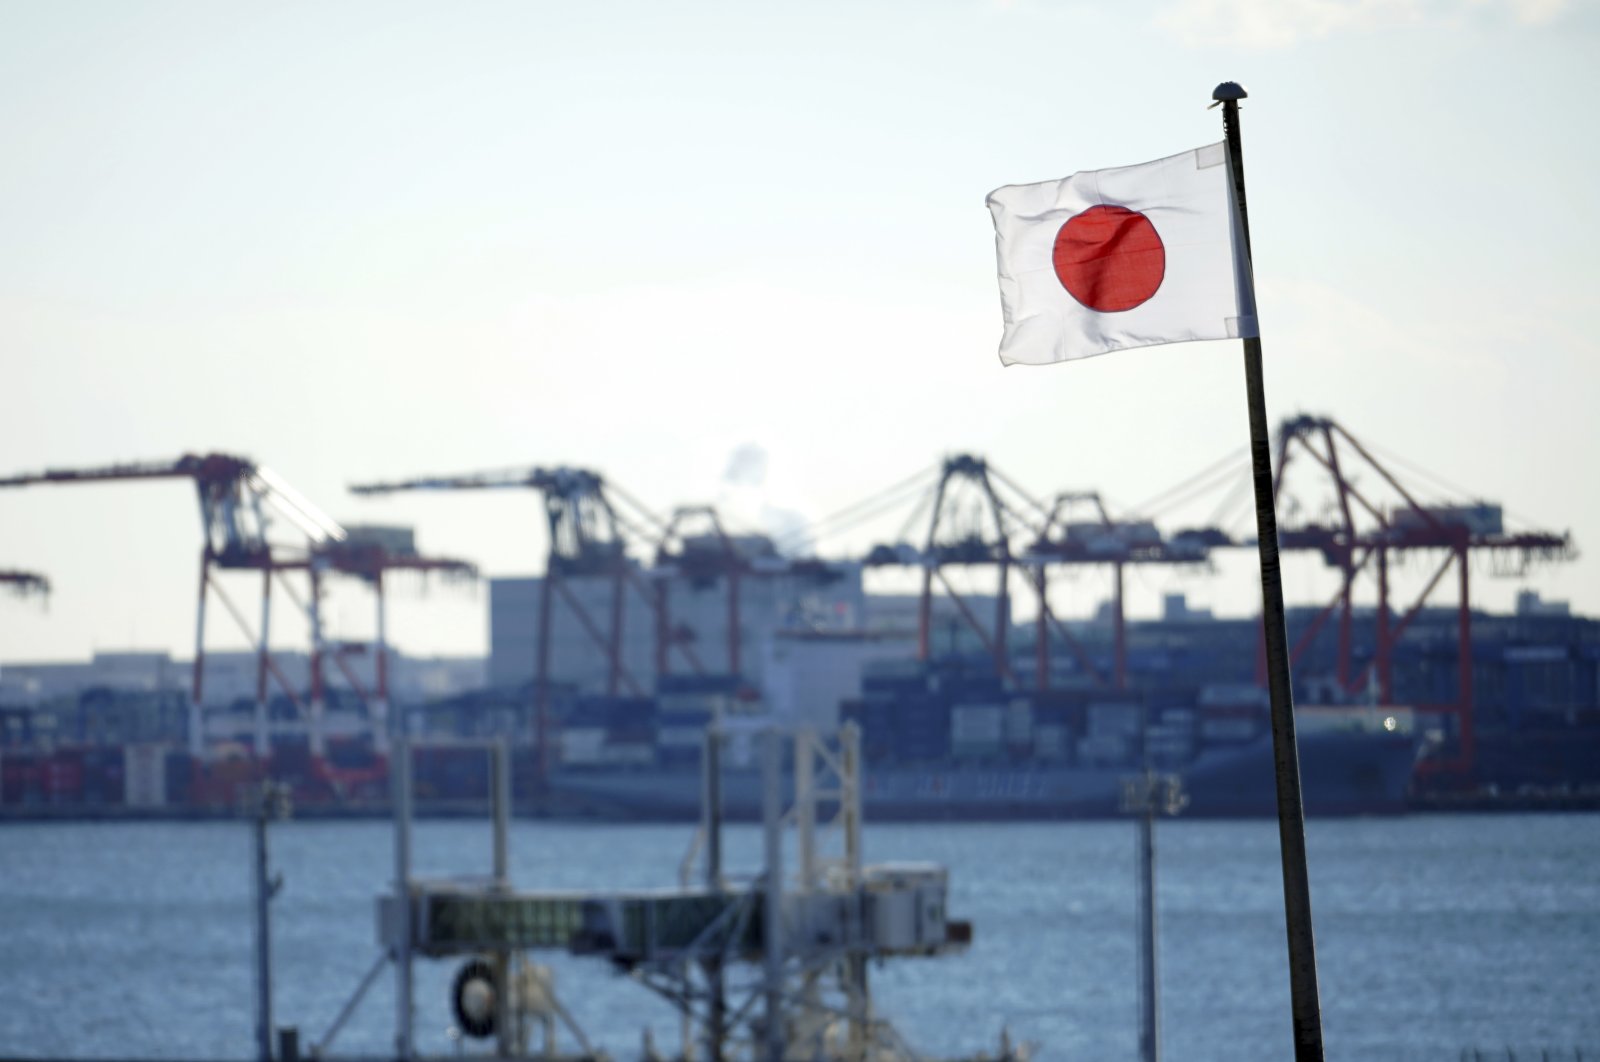 A national flag flies near a container port, in Tokyo, Japan, Jan. 20, 2022. (AP Photo)